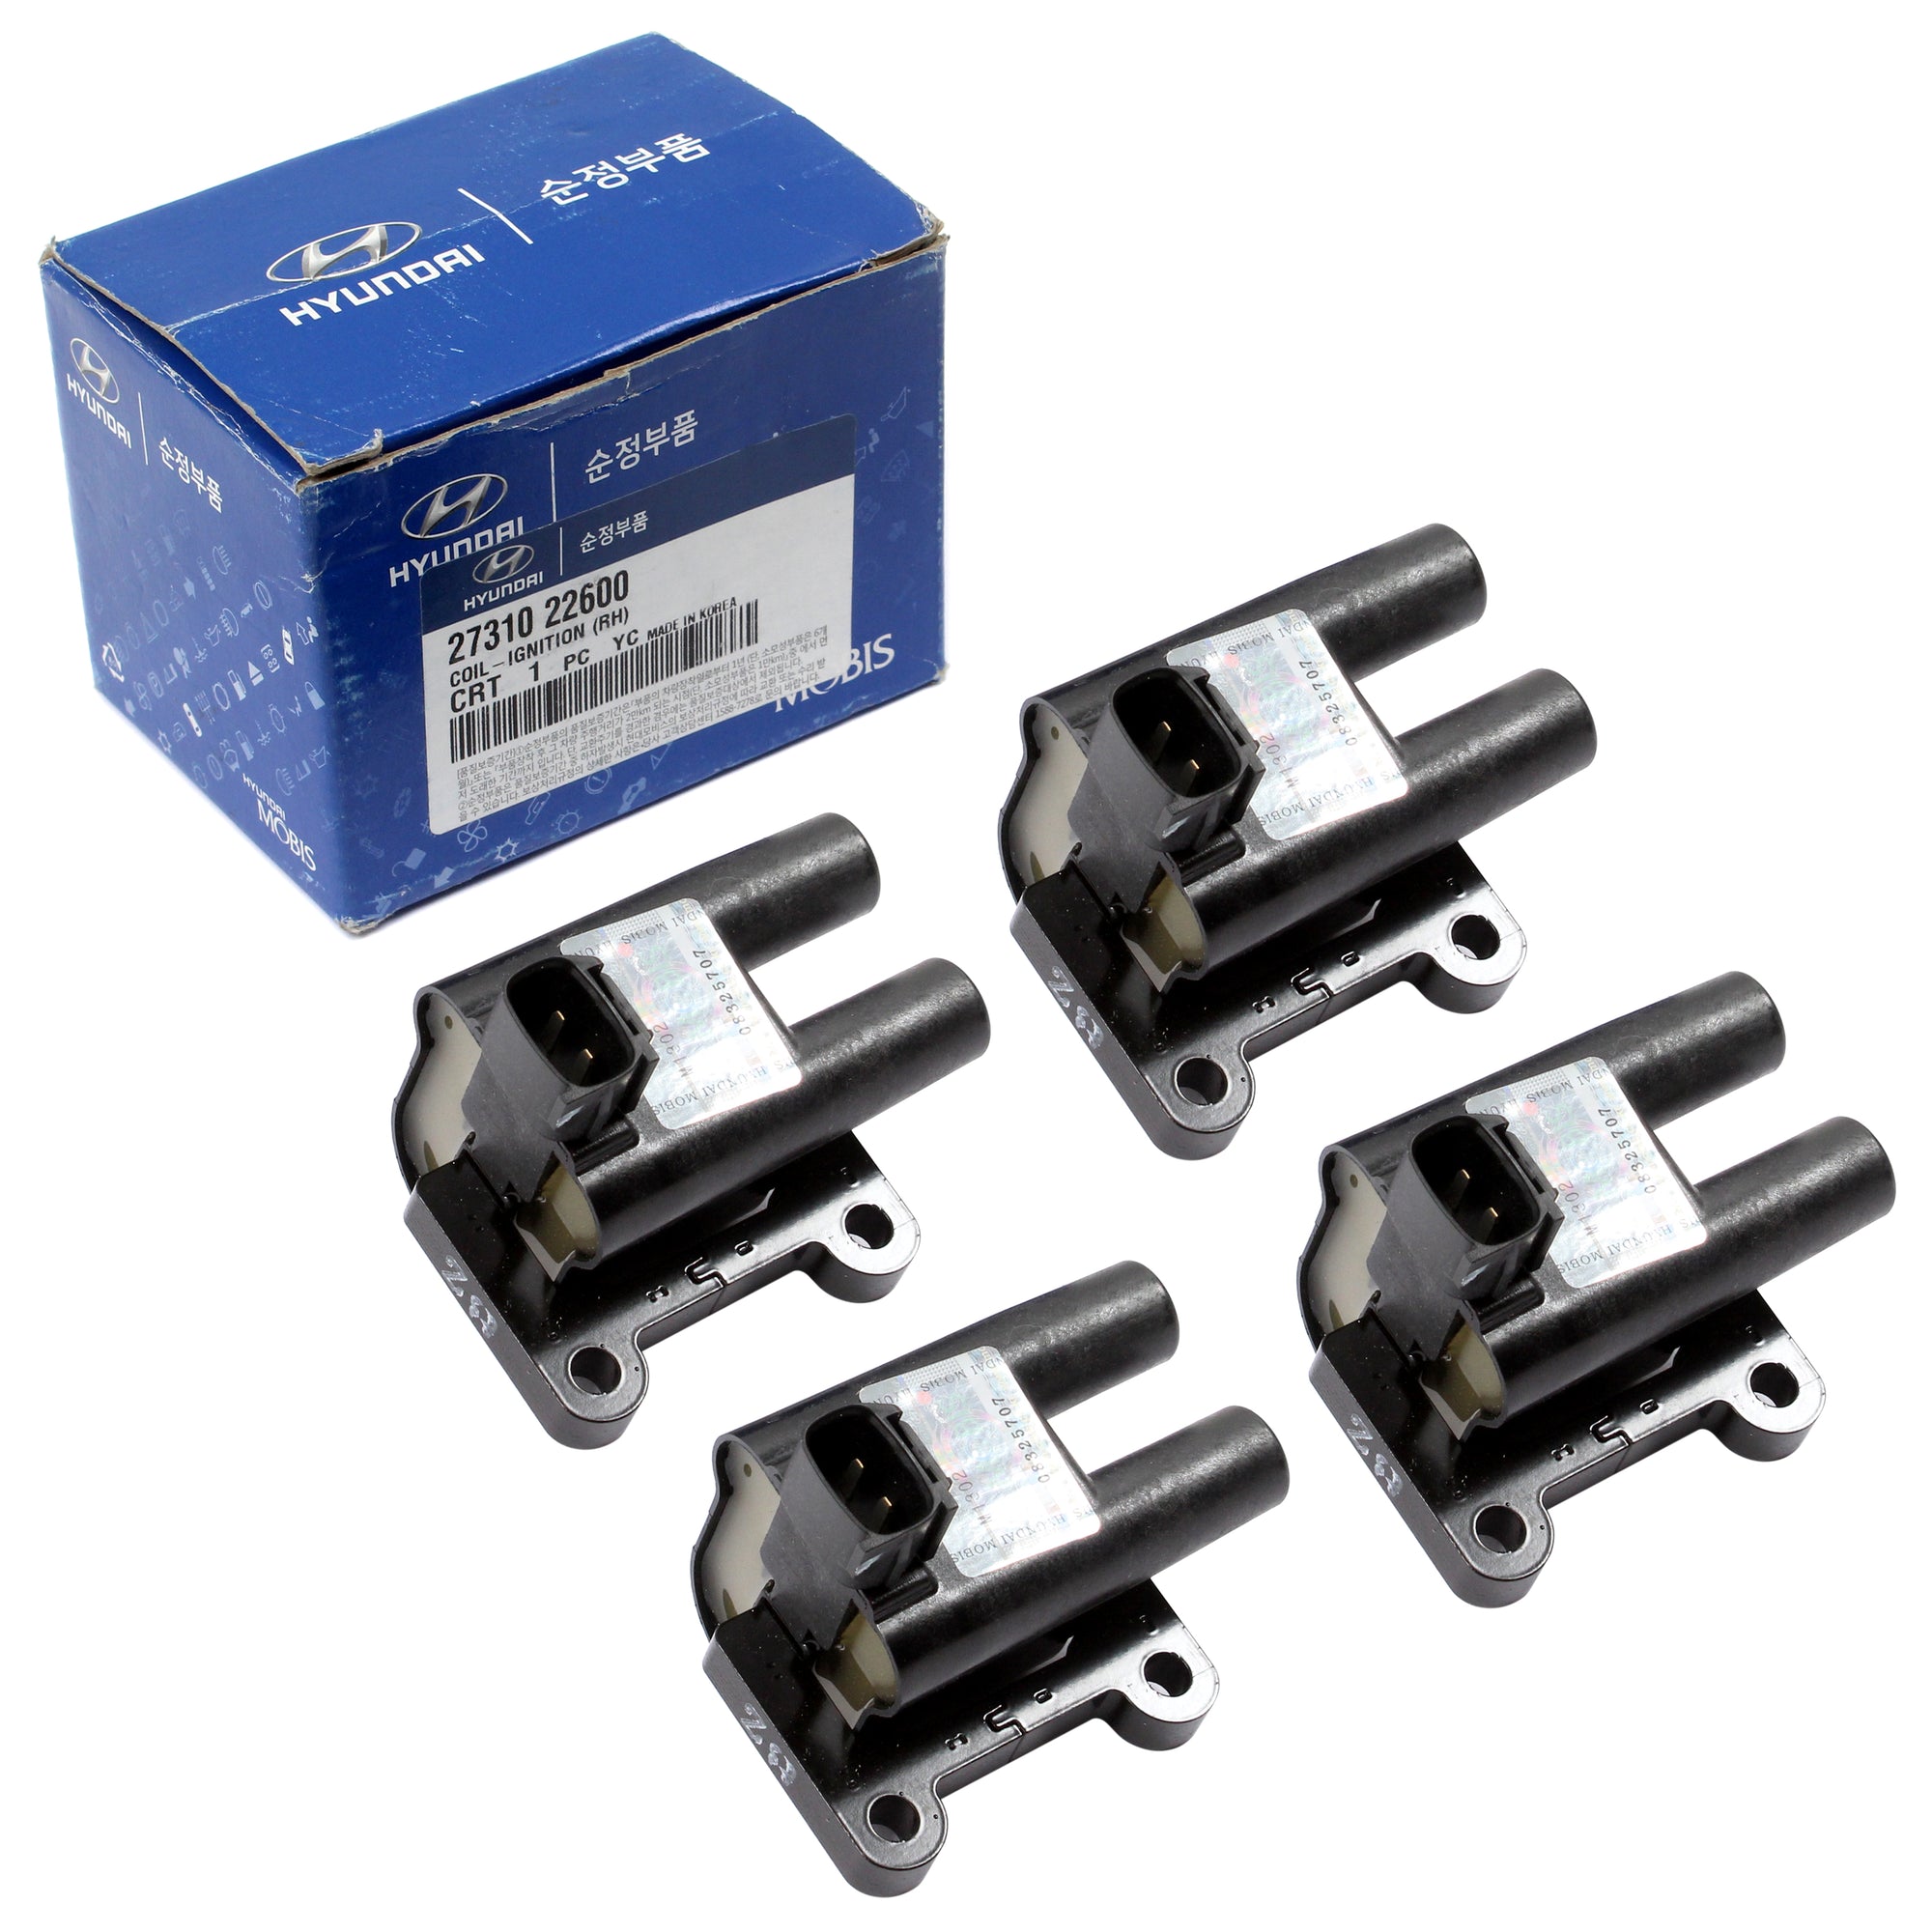 GENUINE 00-02 For Hyundai Accent 1.5 SOHC Ignition Coil OEM 27310-22600 SET OF 4